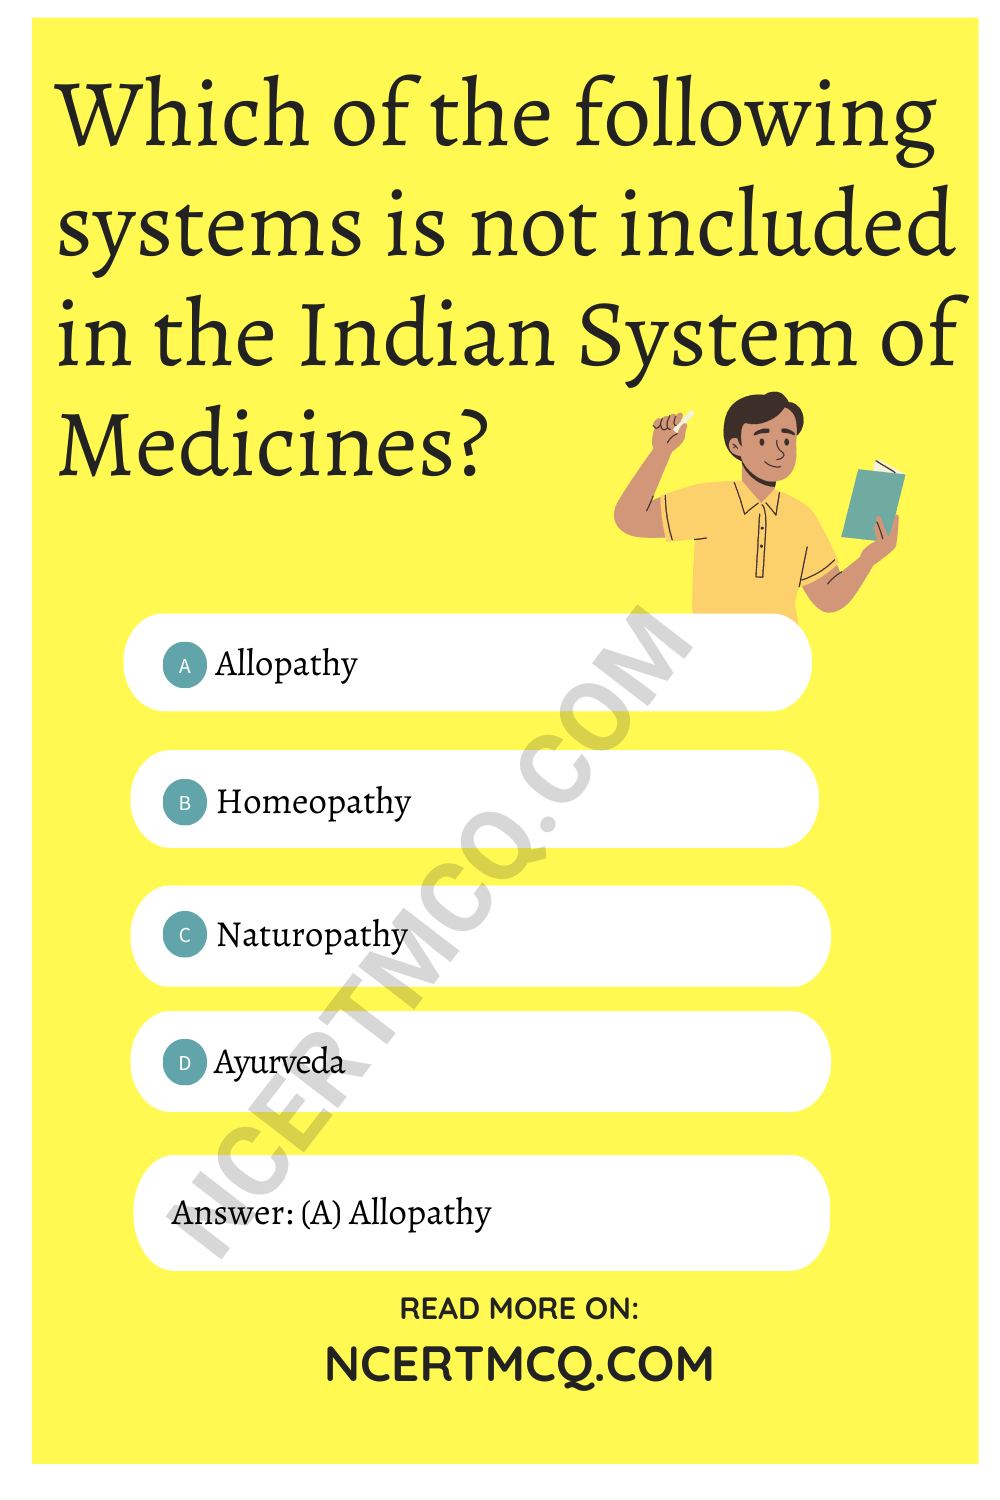 Which of the following systems is not included in the Indian System of Medicines?